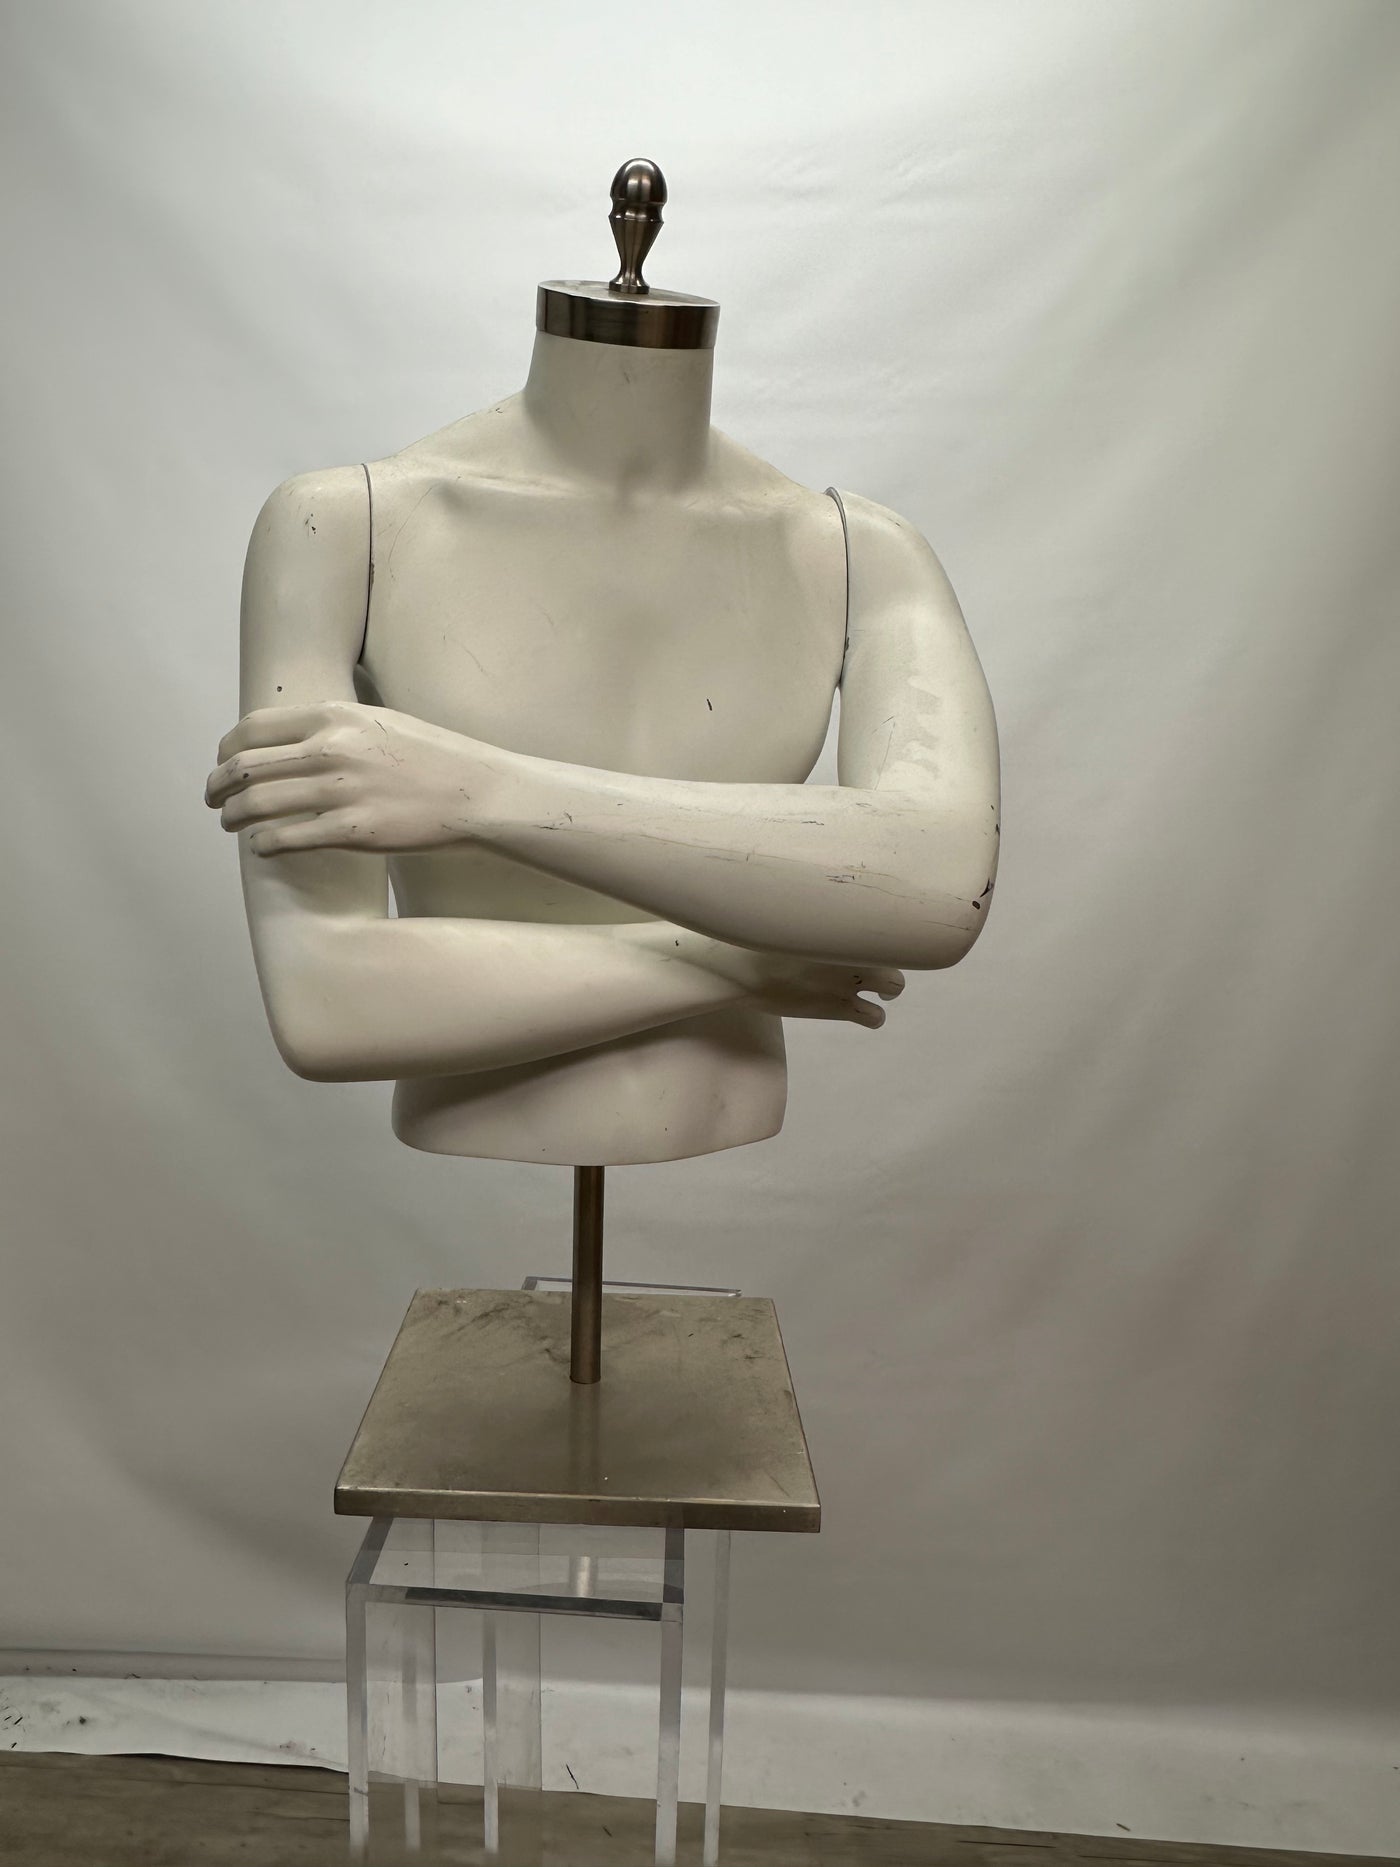 Used Male Mannequin Torso with Arms